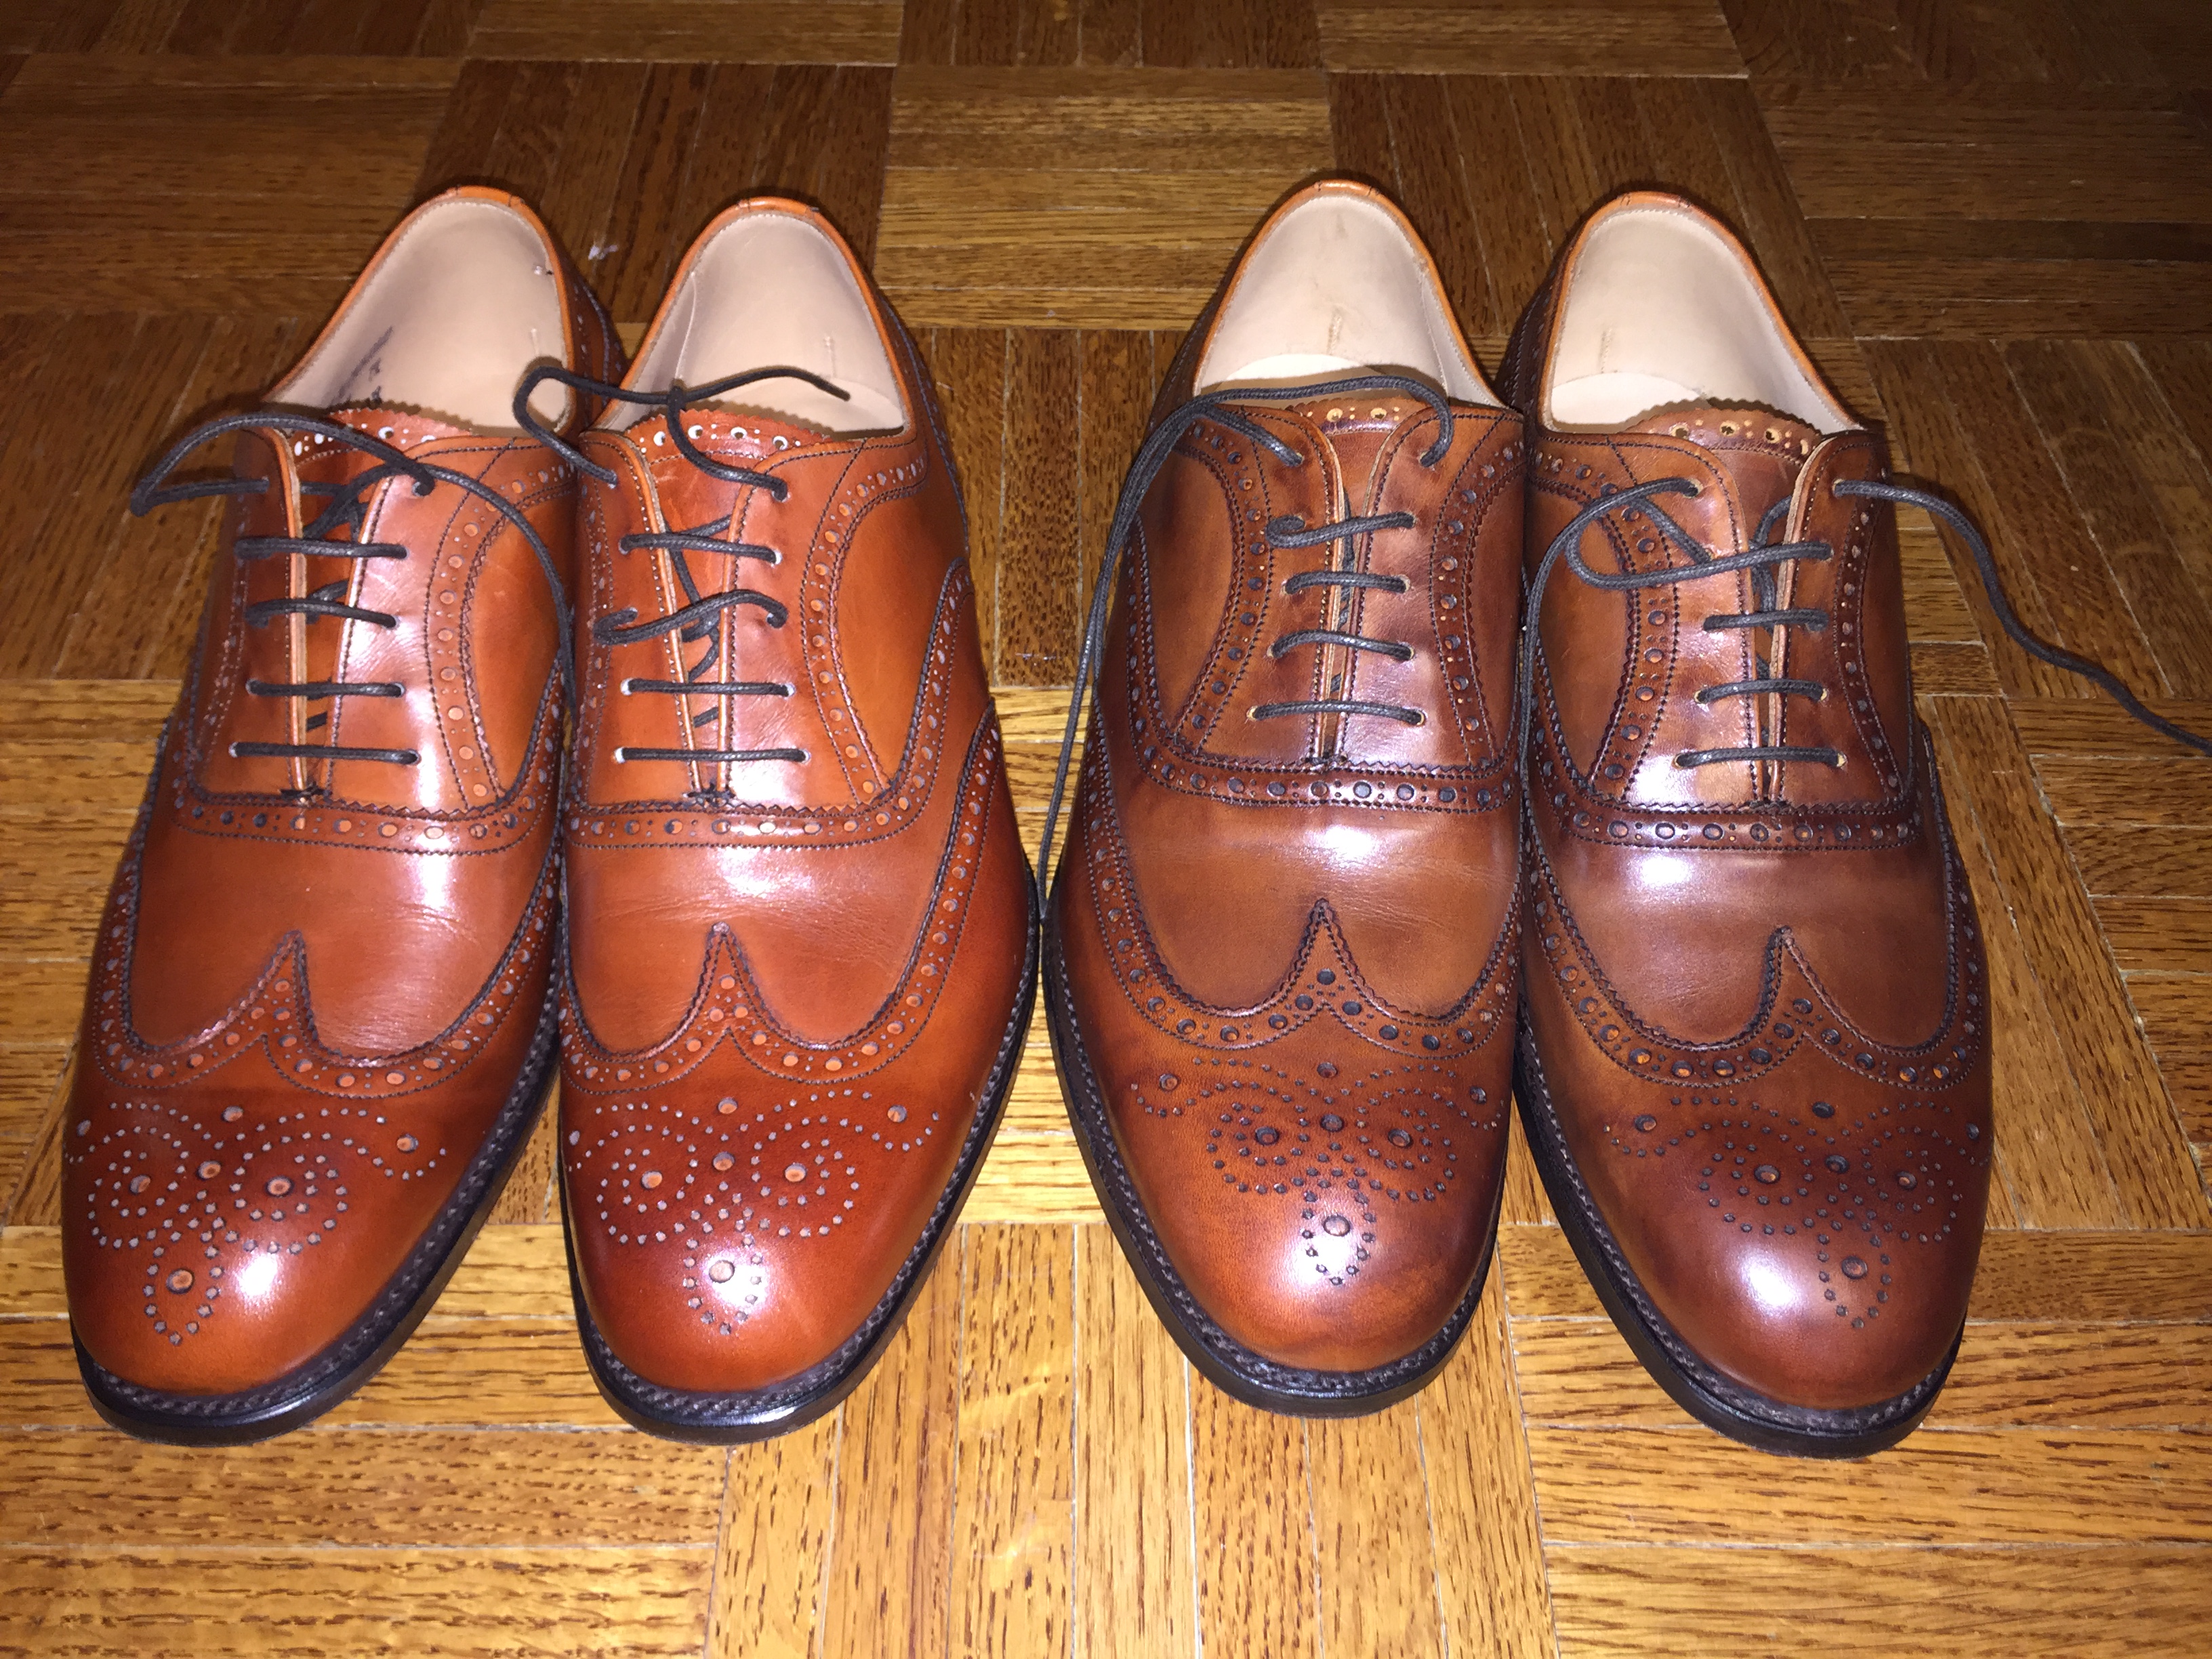 Marked variation among Cheaney shoes 